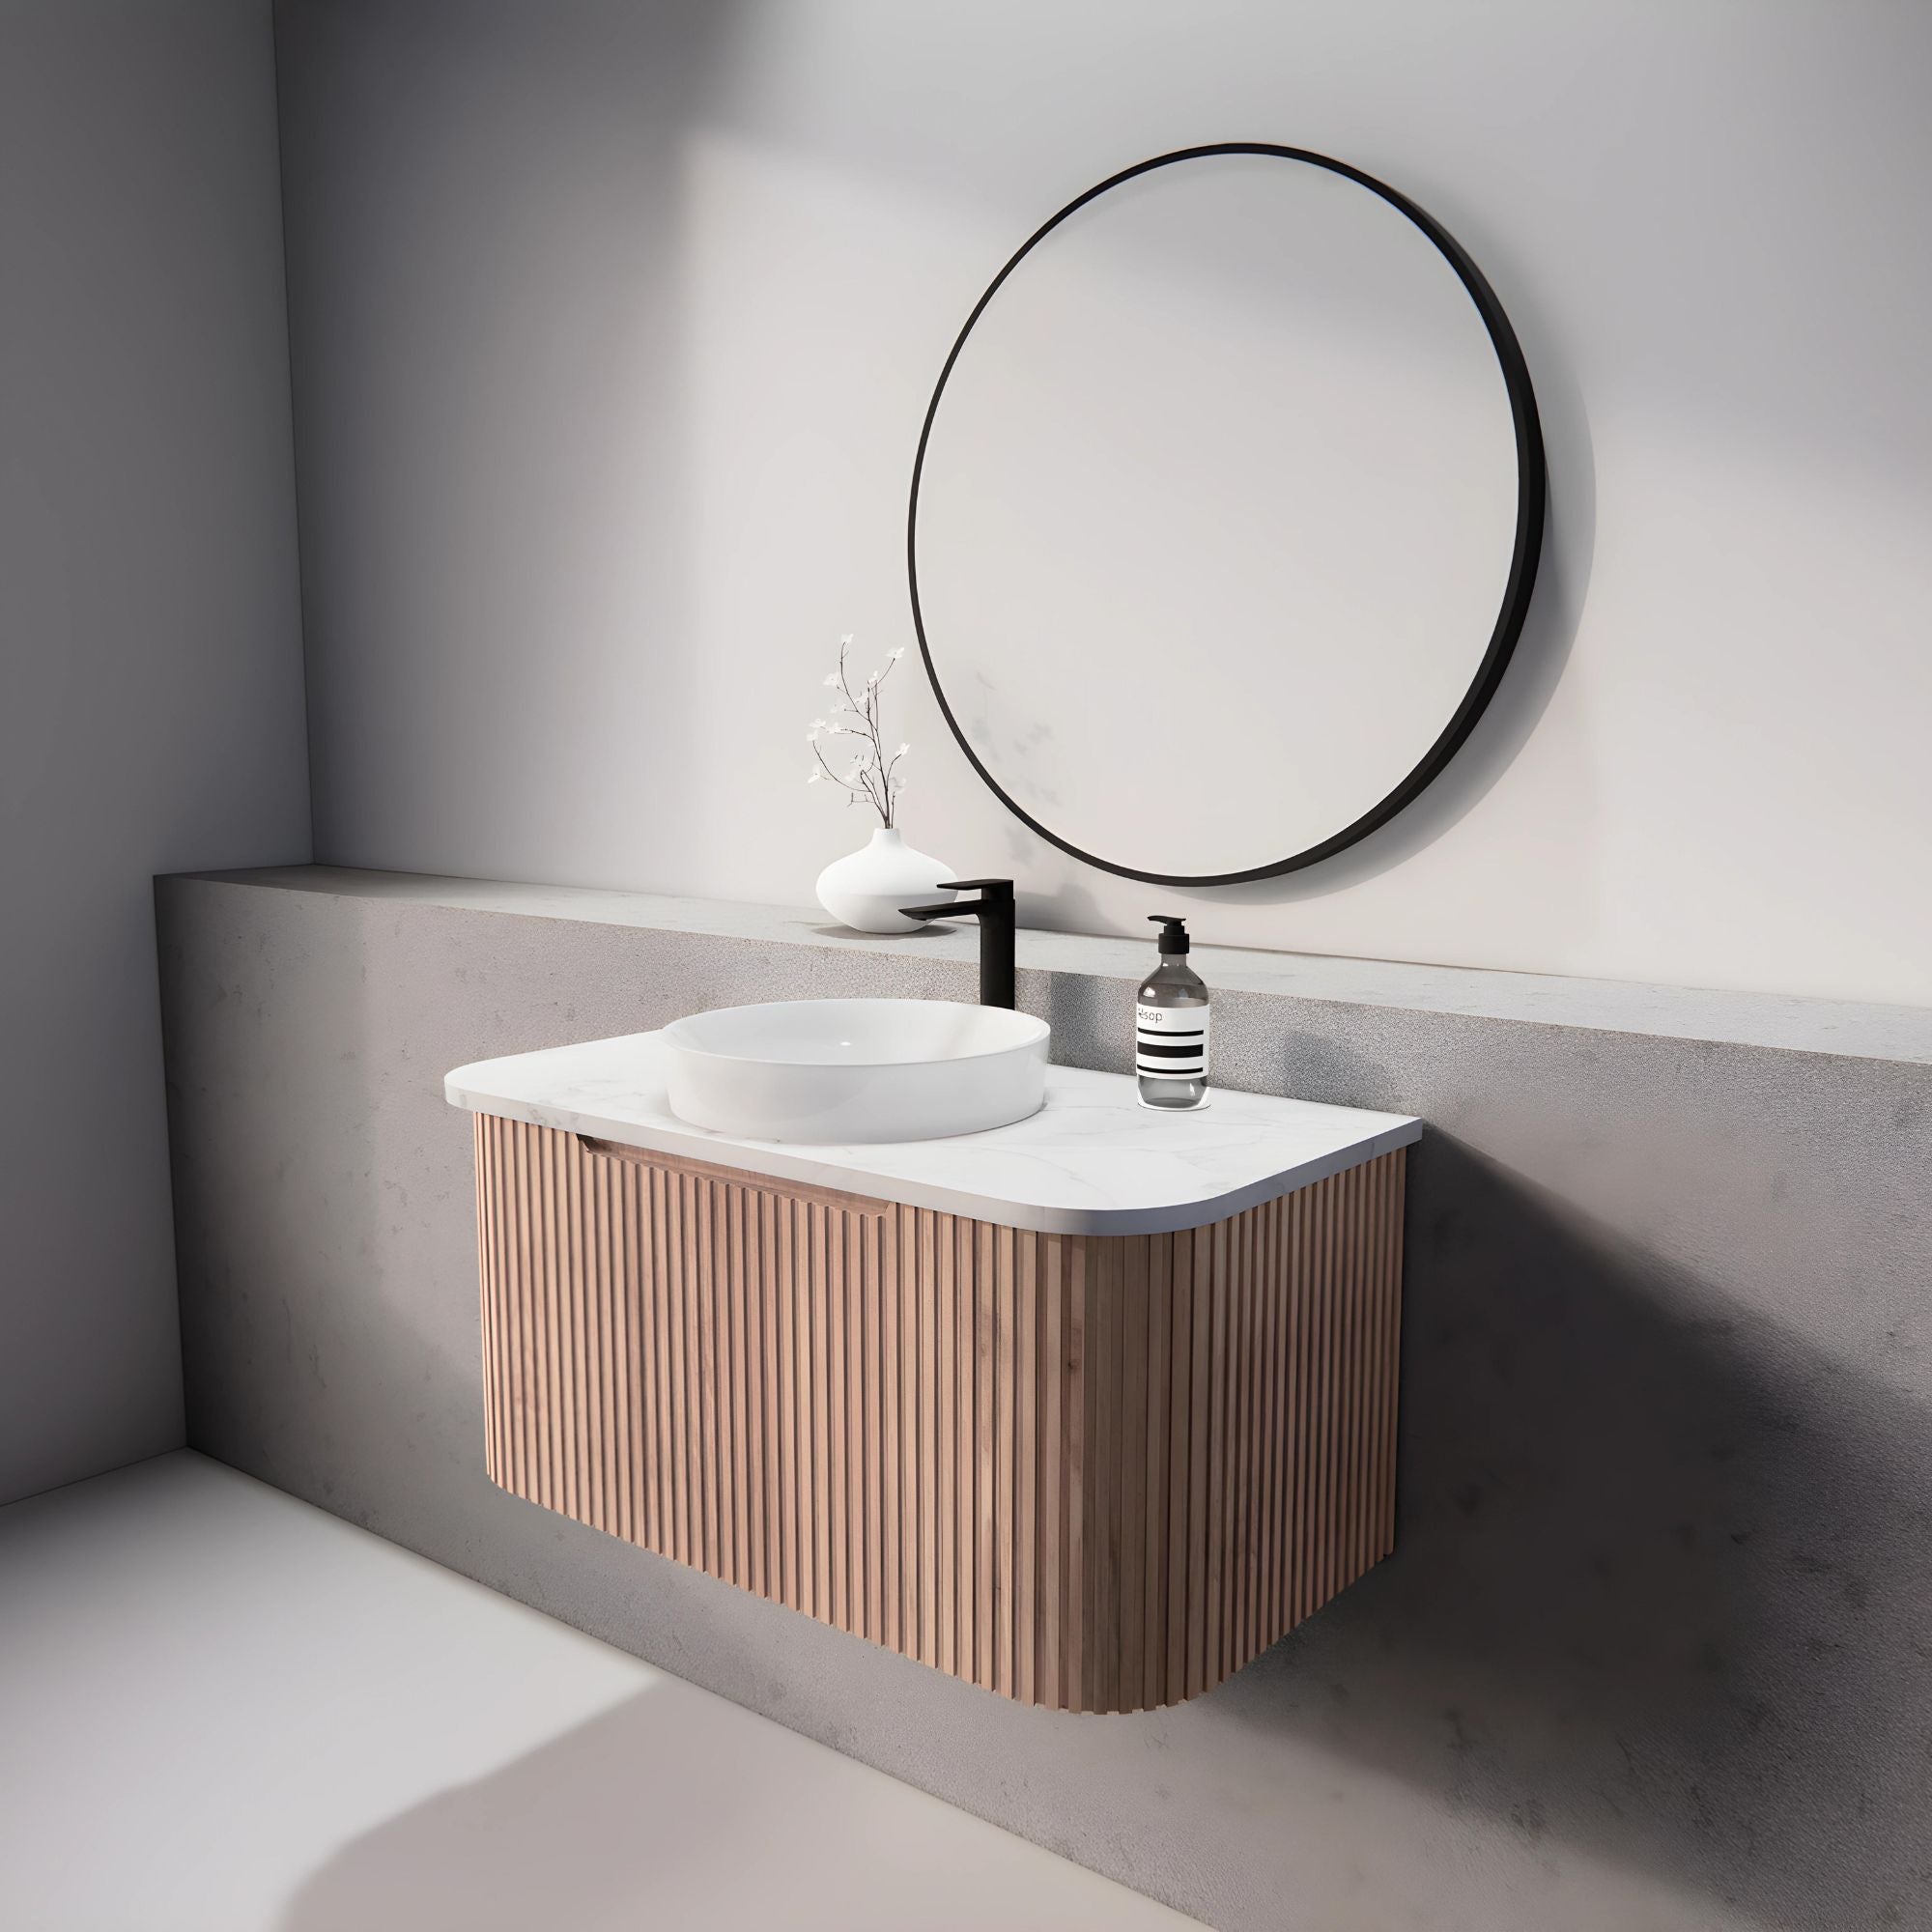 RIVA BERGEN SOLID TIMBER 900MM SINGLE BOWL WALL HUNG VANITY